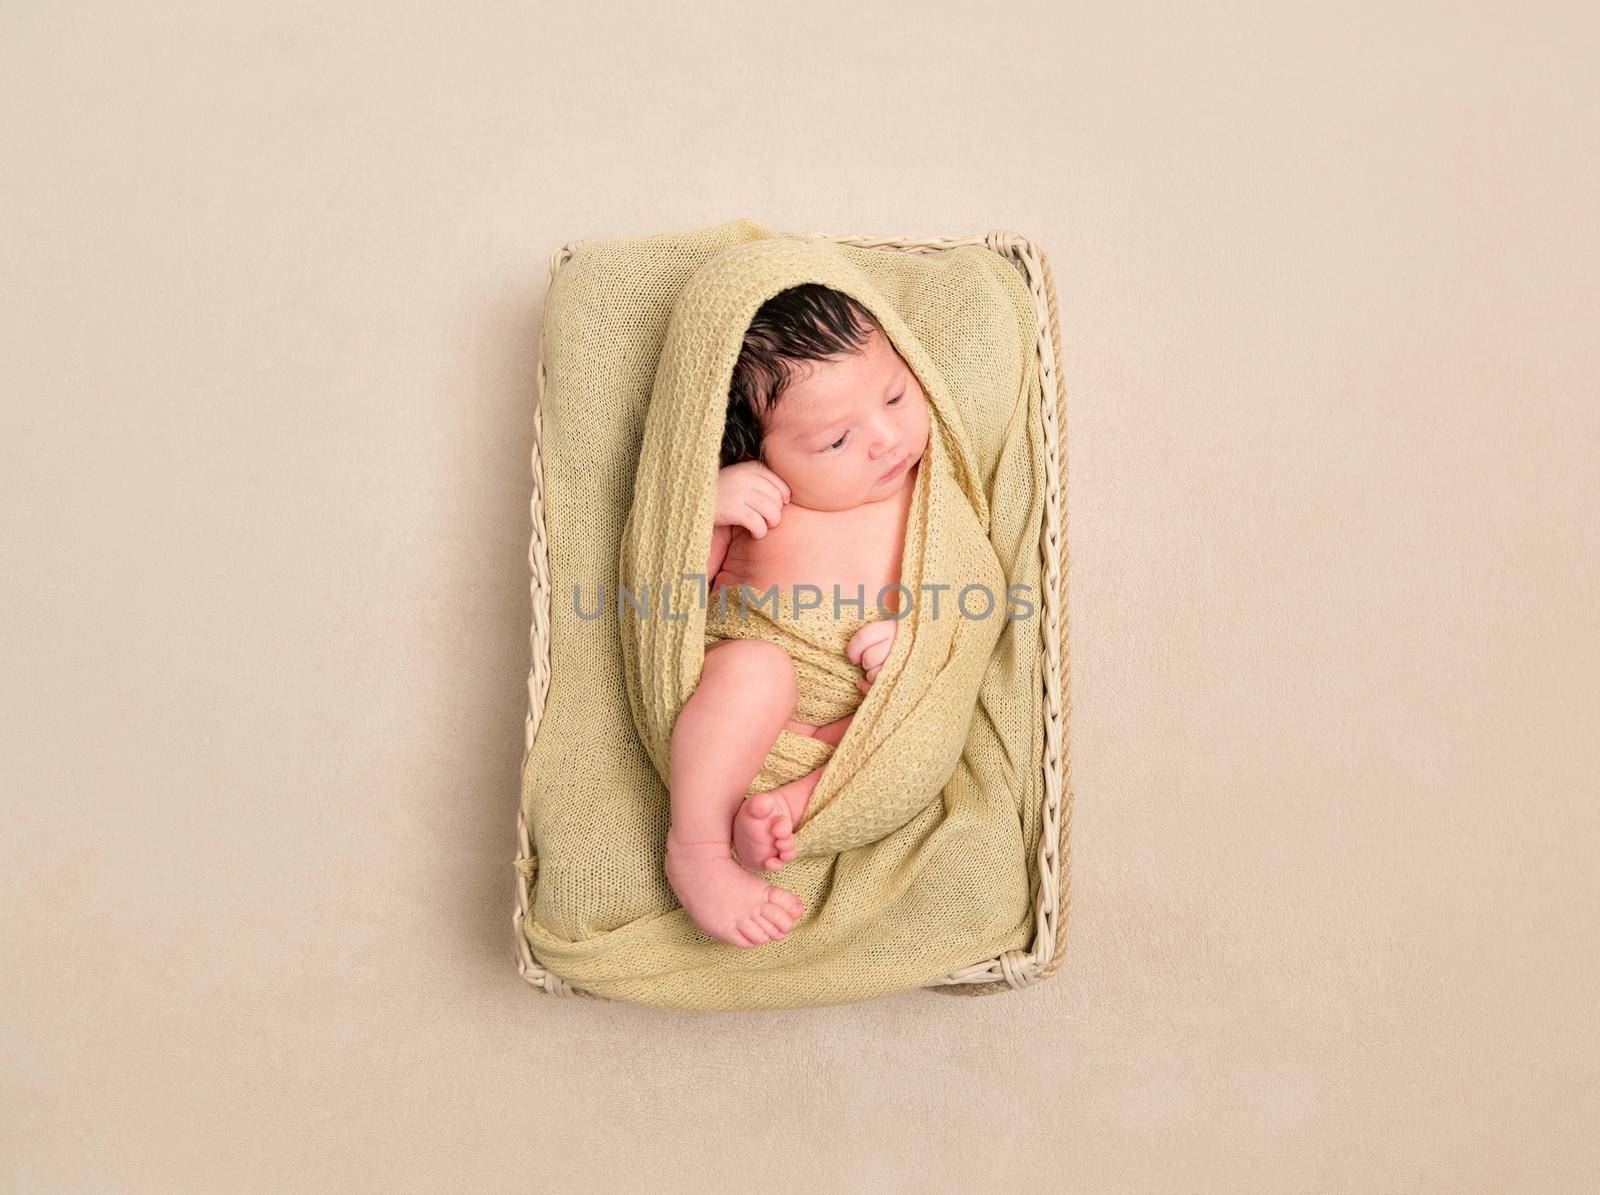 Wrapped from head to toe black-haired baby in a child's basket, resting with eyes opened